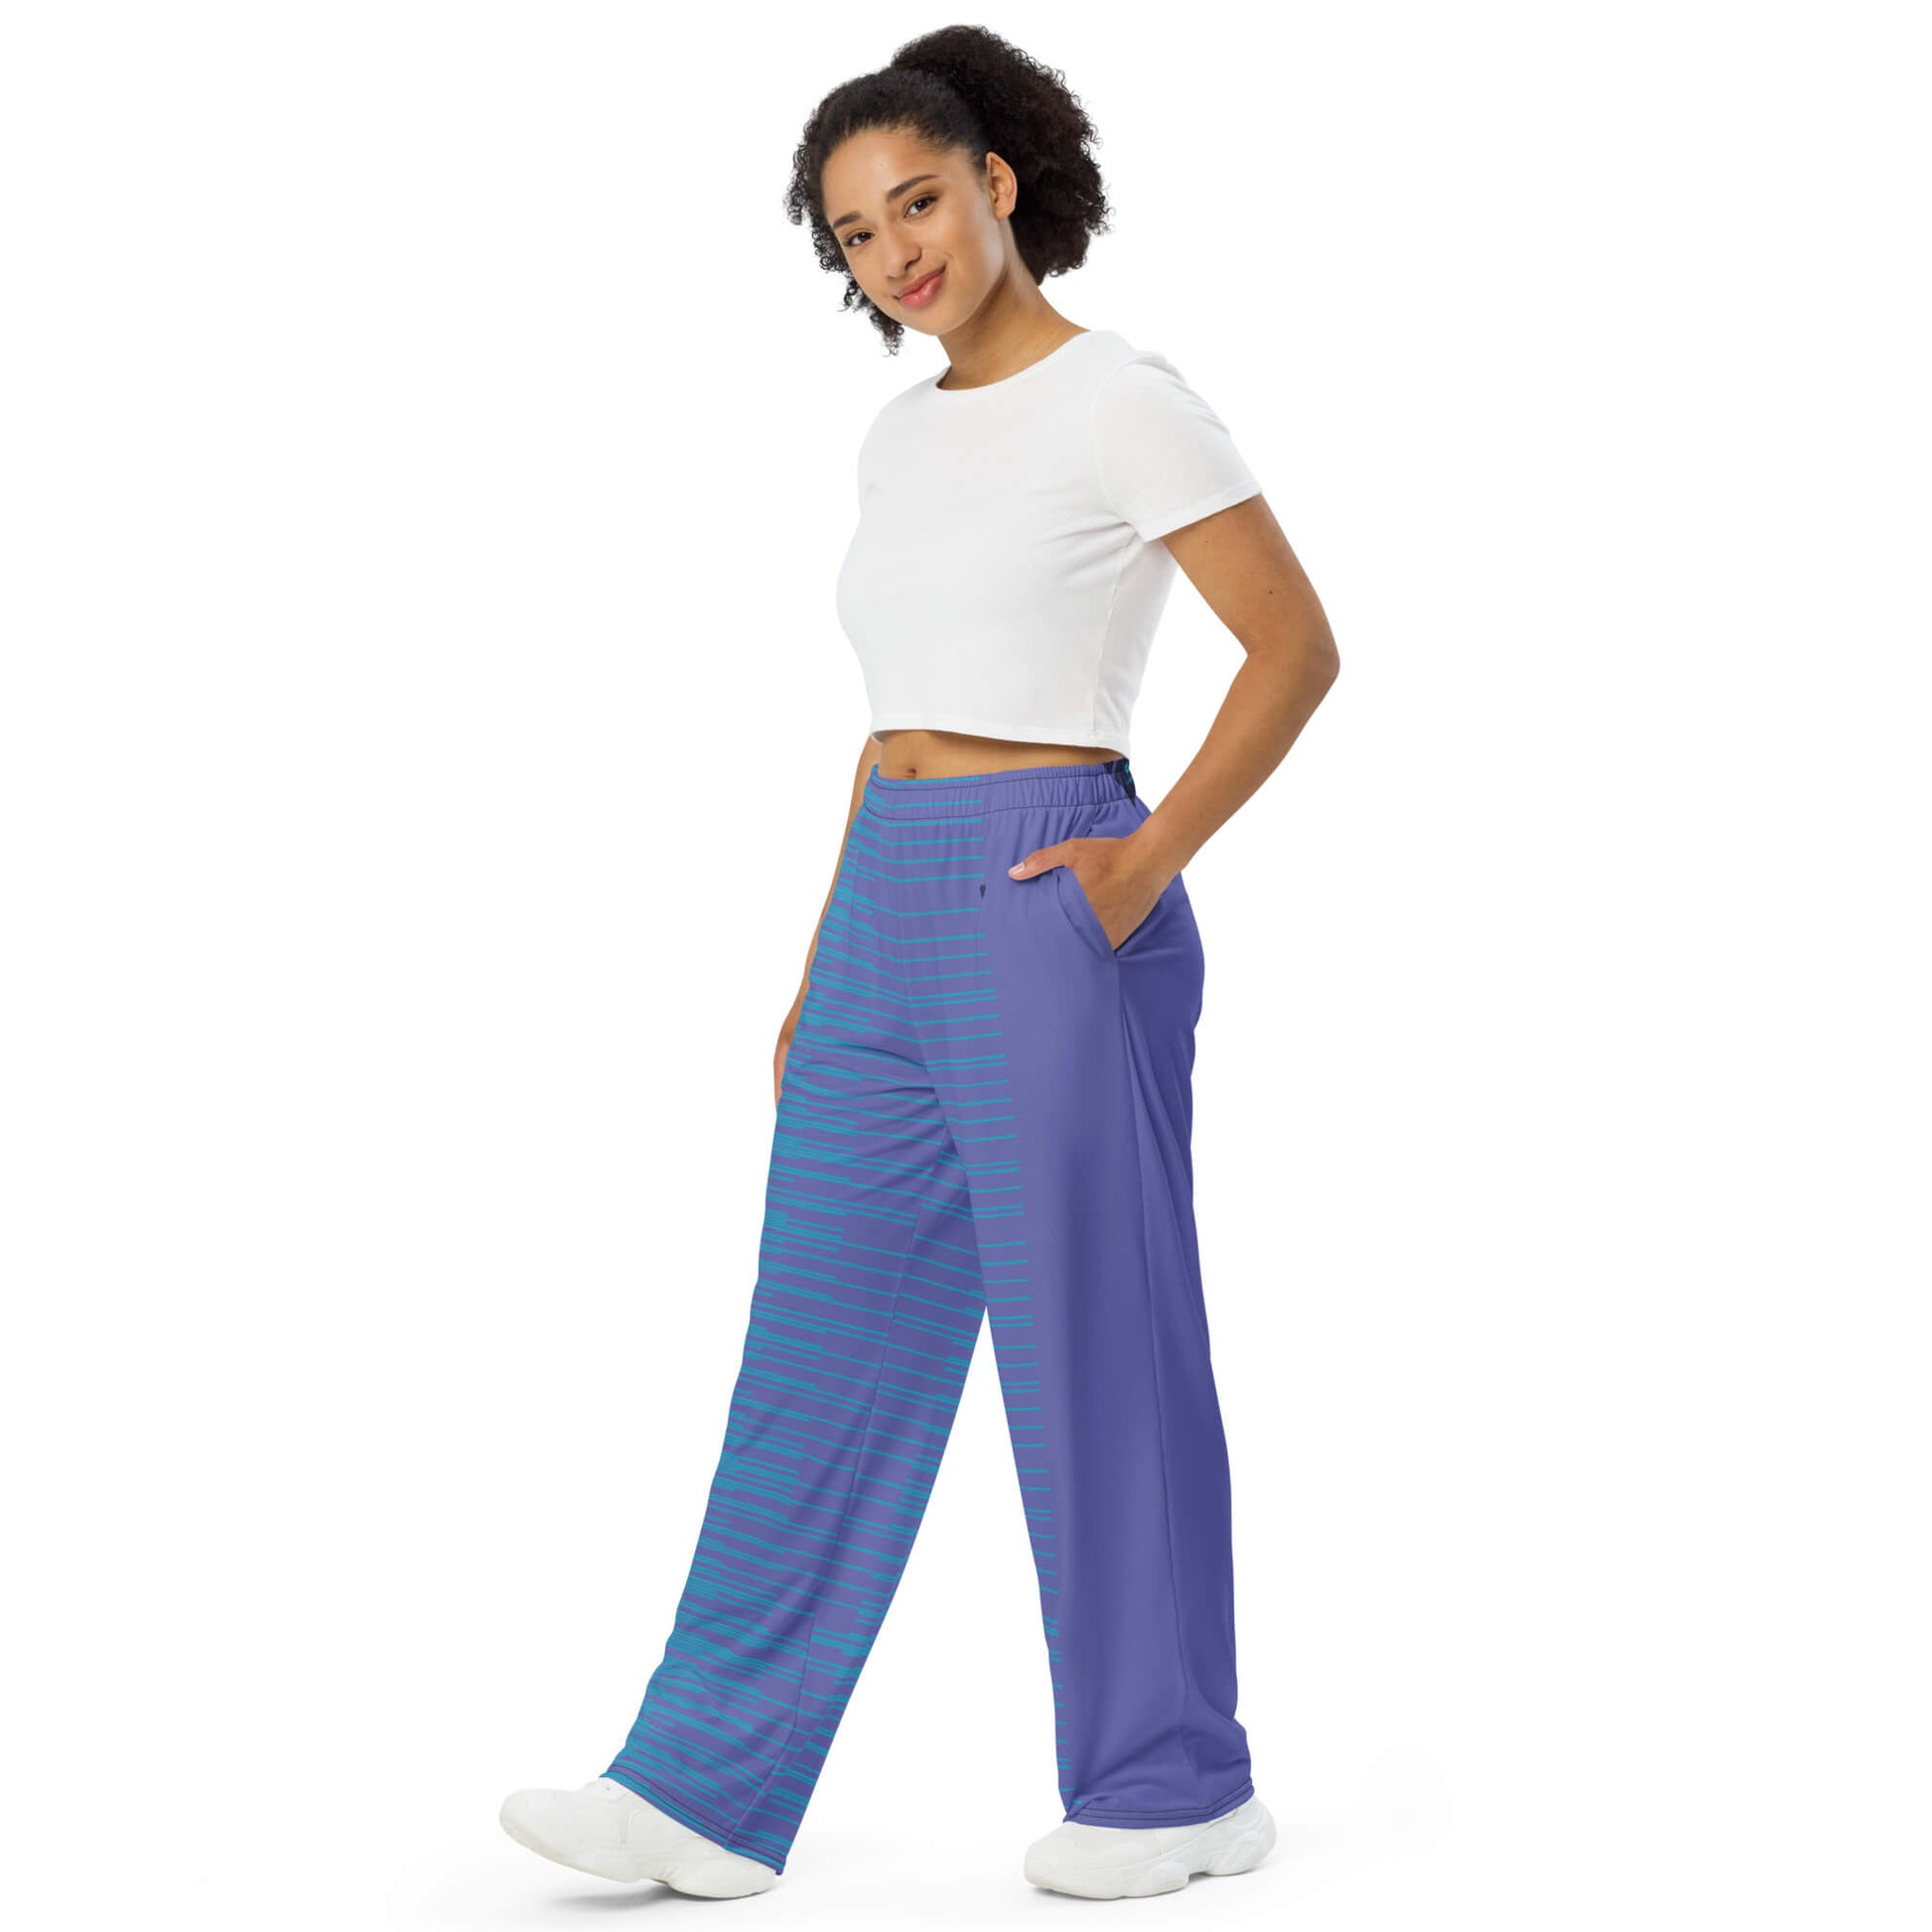 Wide-legged wonder, Periwinkle Stripes Dual Pants, for a comfy and fashionable look